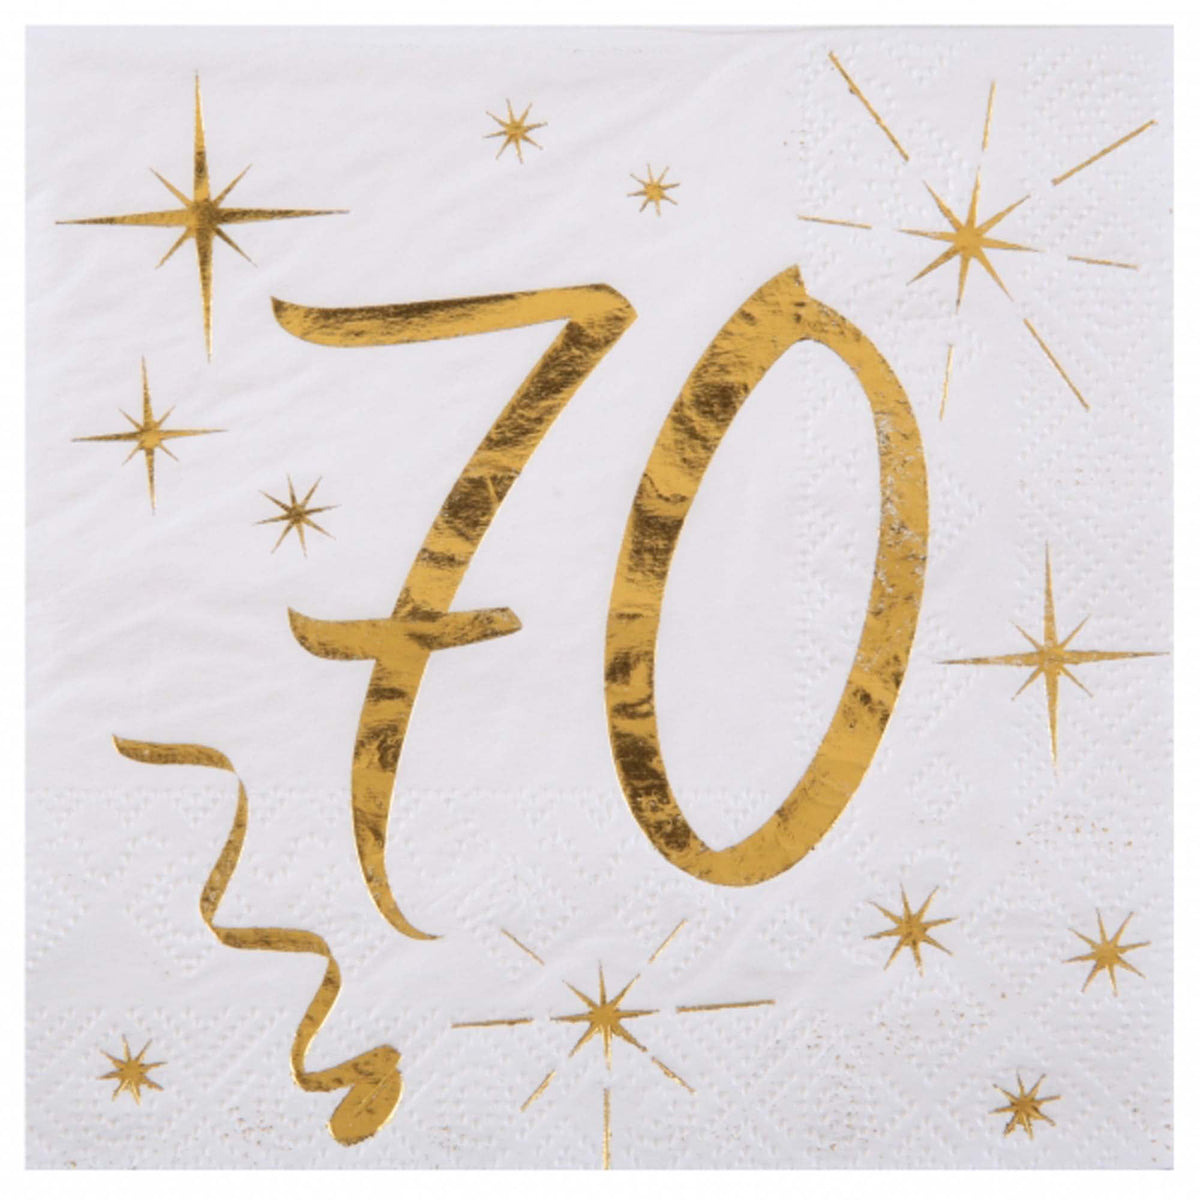 SANTEX General Birthday Starry Golden Age 70th Birthday Large Lunch Napkins, 20 Count